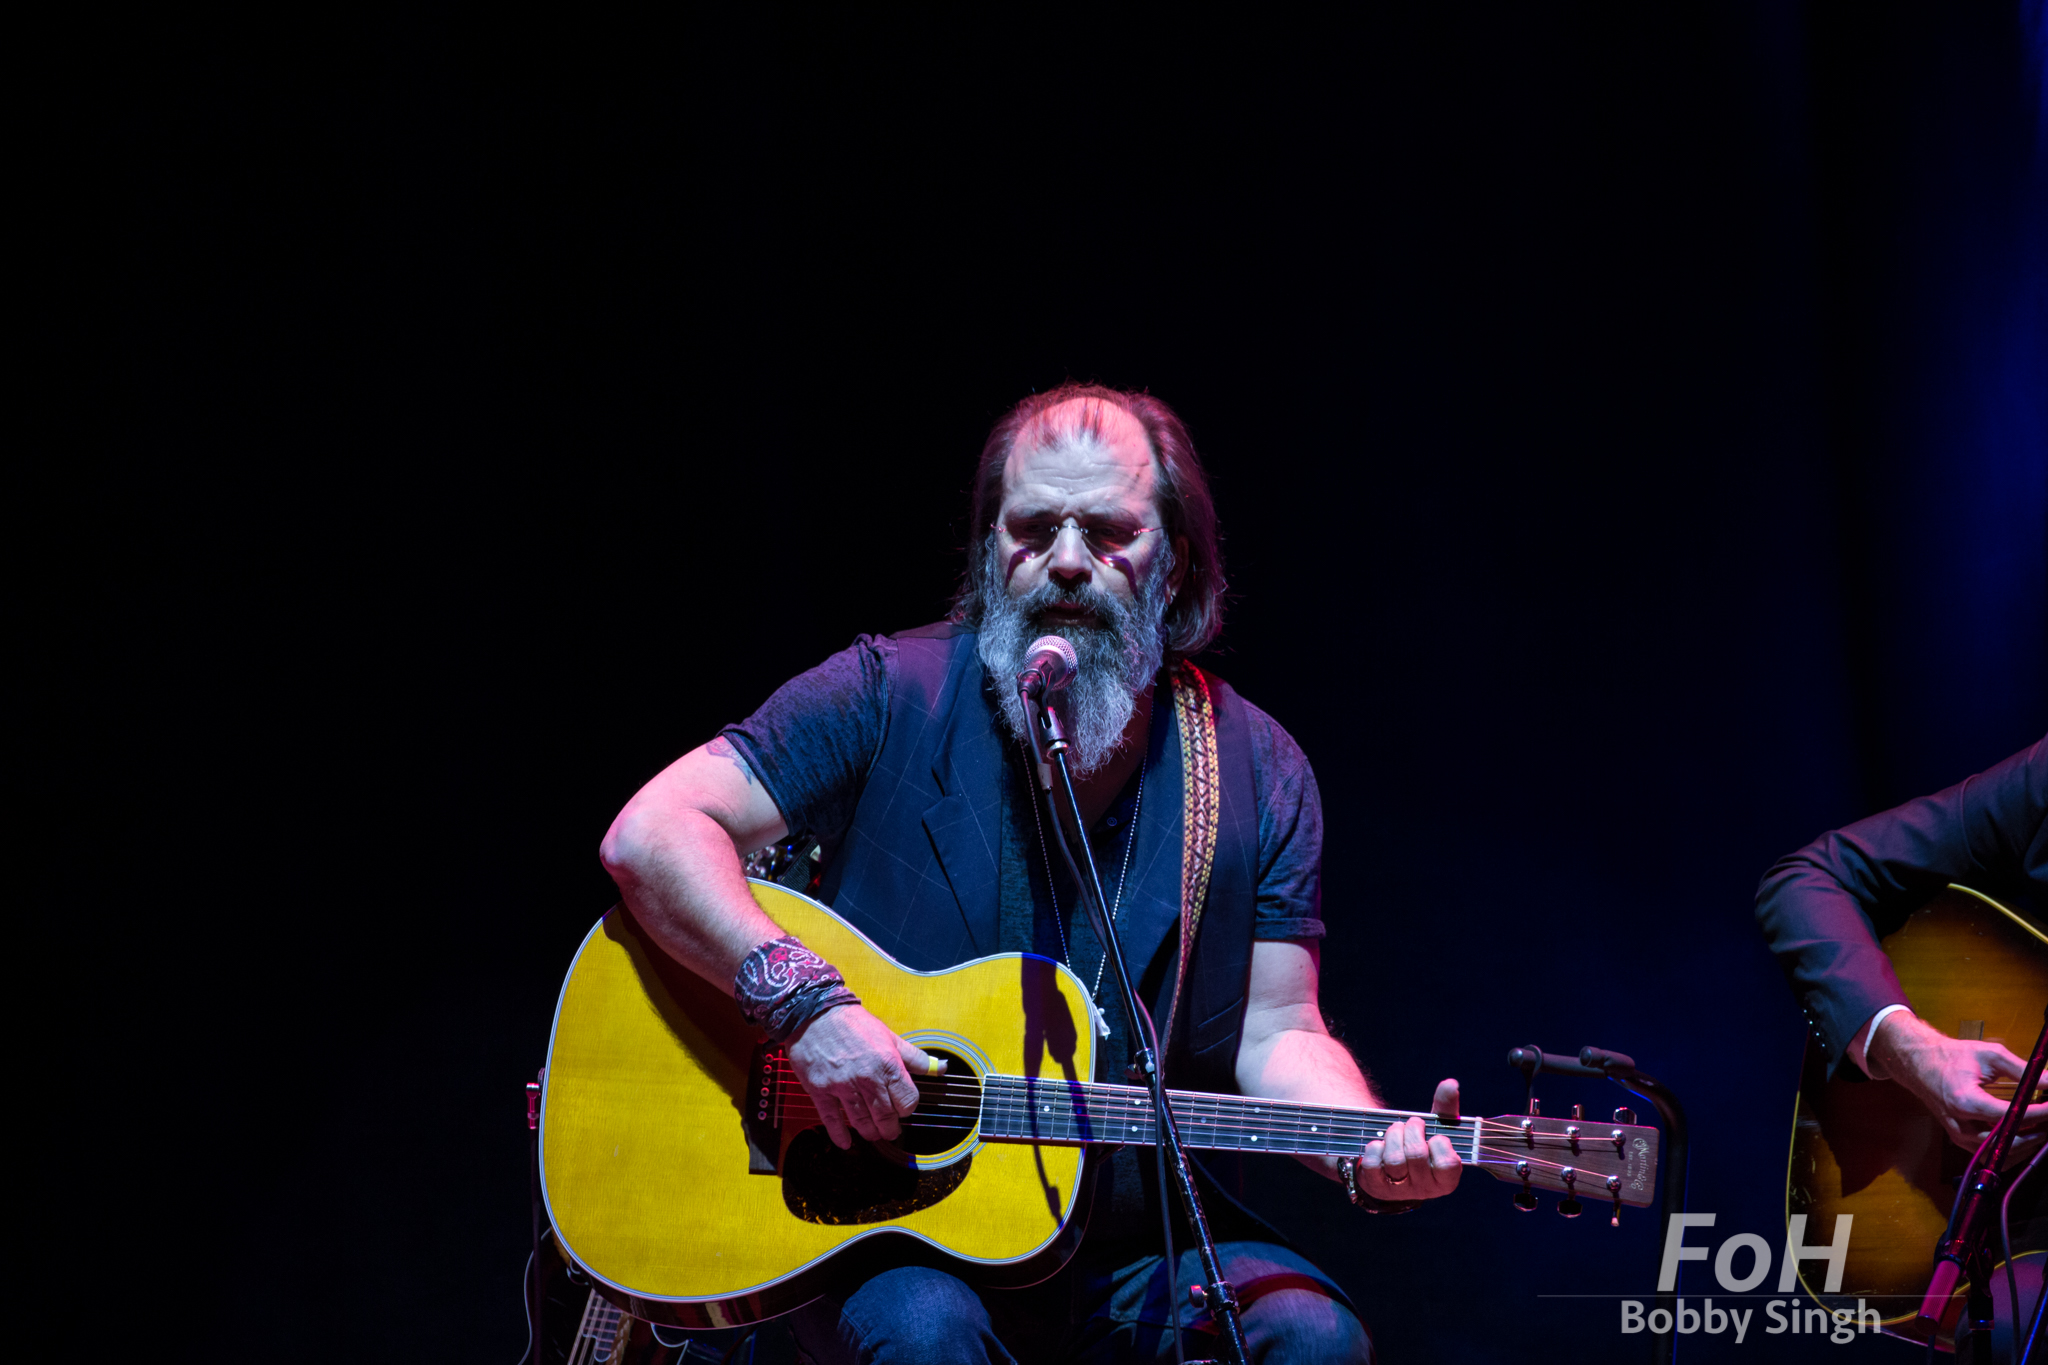  Steve Earle performing at the Lampedusa Concert for Refugees fundraiser at Massey Hall in Toronto 